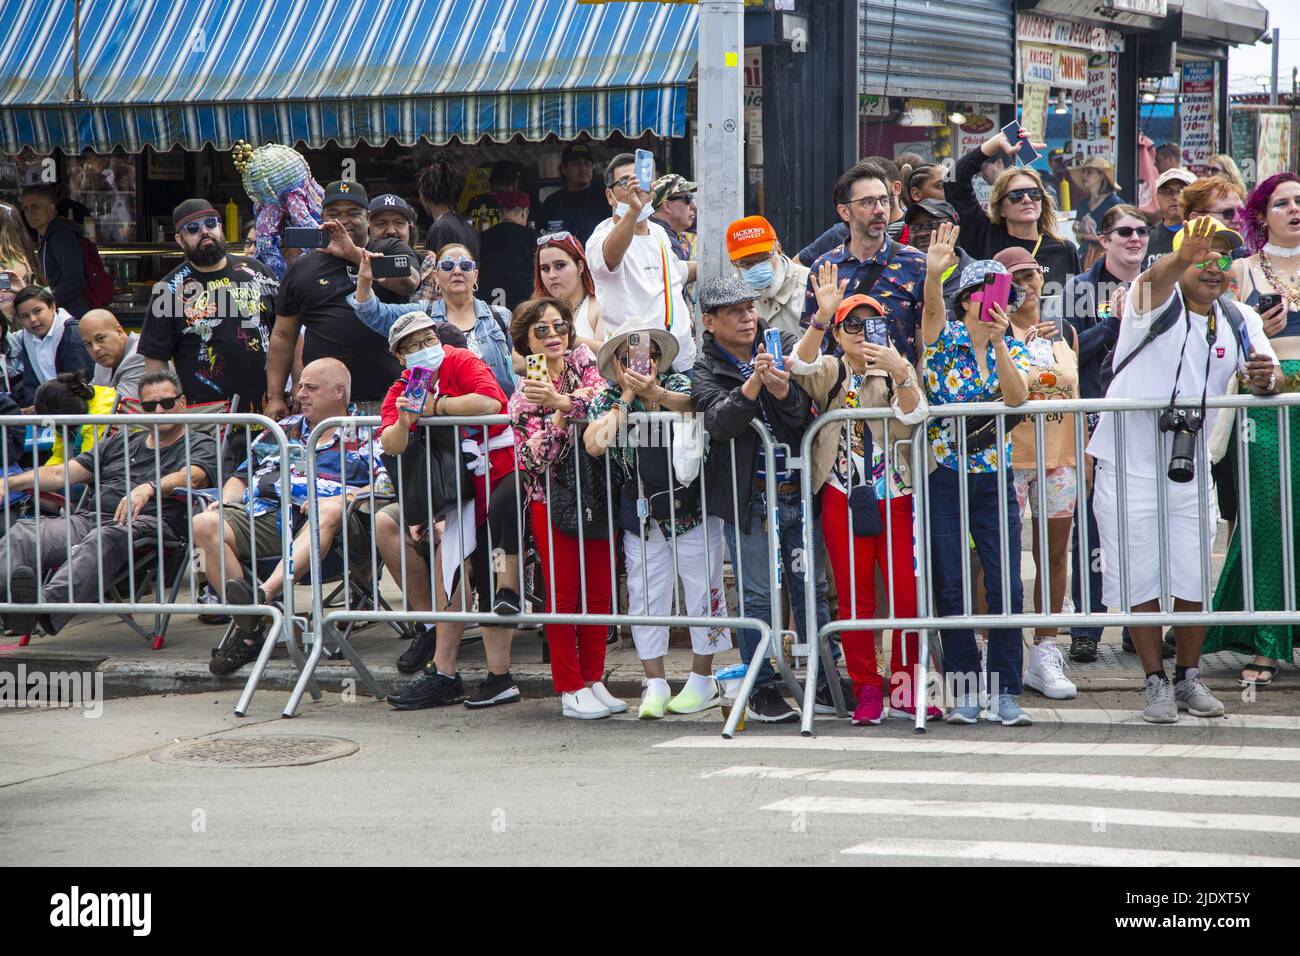 After 2 years from a Covid-19 shutdown, people return to the annual Mermaid Parade, alleged to be the largest art parade in the nation, at Coney Island along Surf Avenue in Brooklyn, New York. Stock Photo